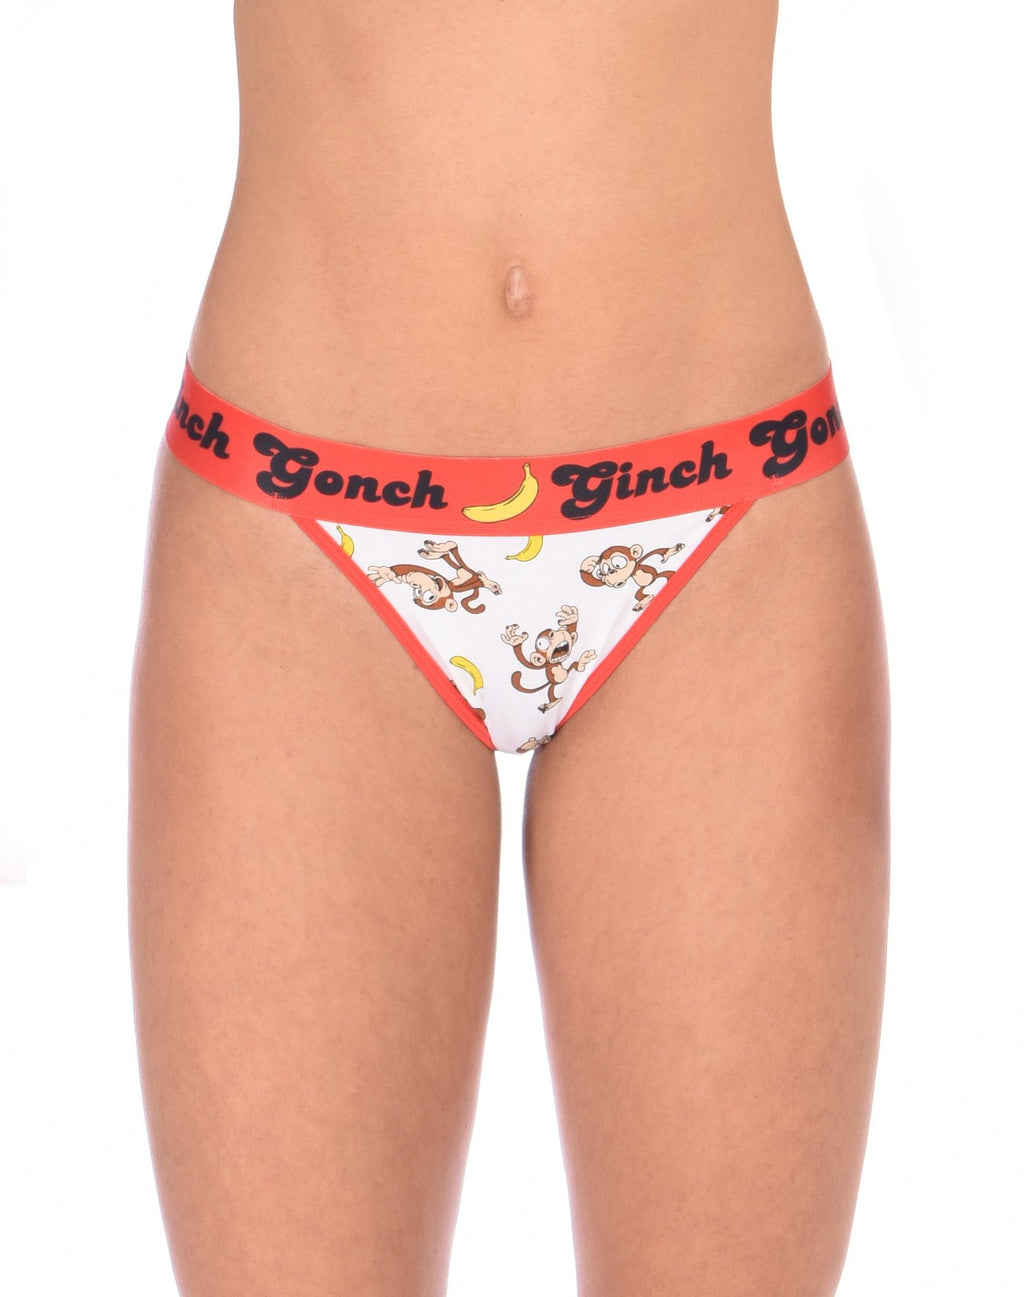 GG Ginch Gonch Gone Bananas thong women's underwear white fabric with monkeys and bananas red trim and red printed waistband front